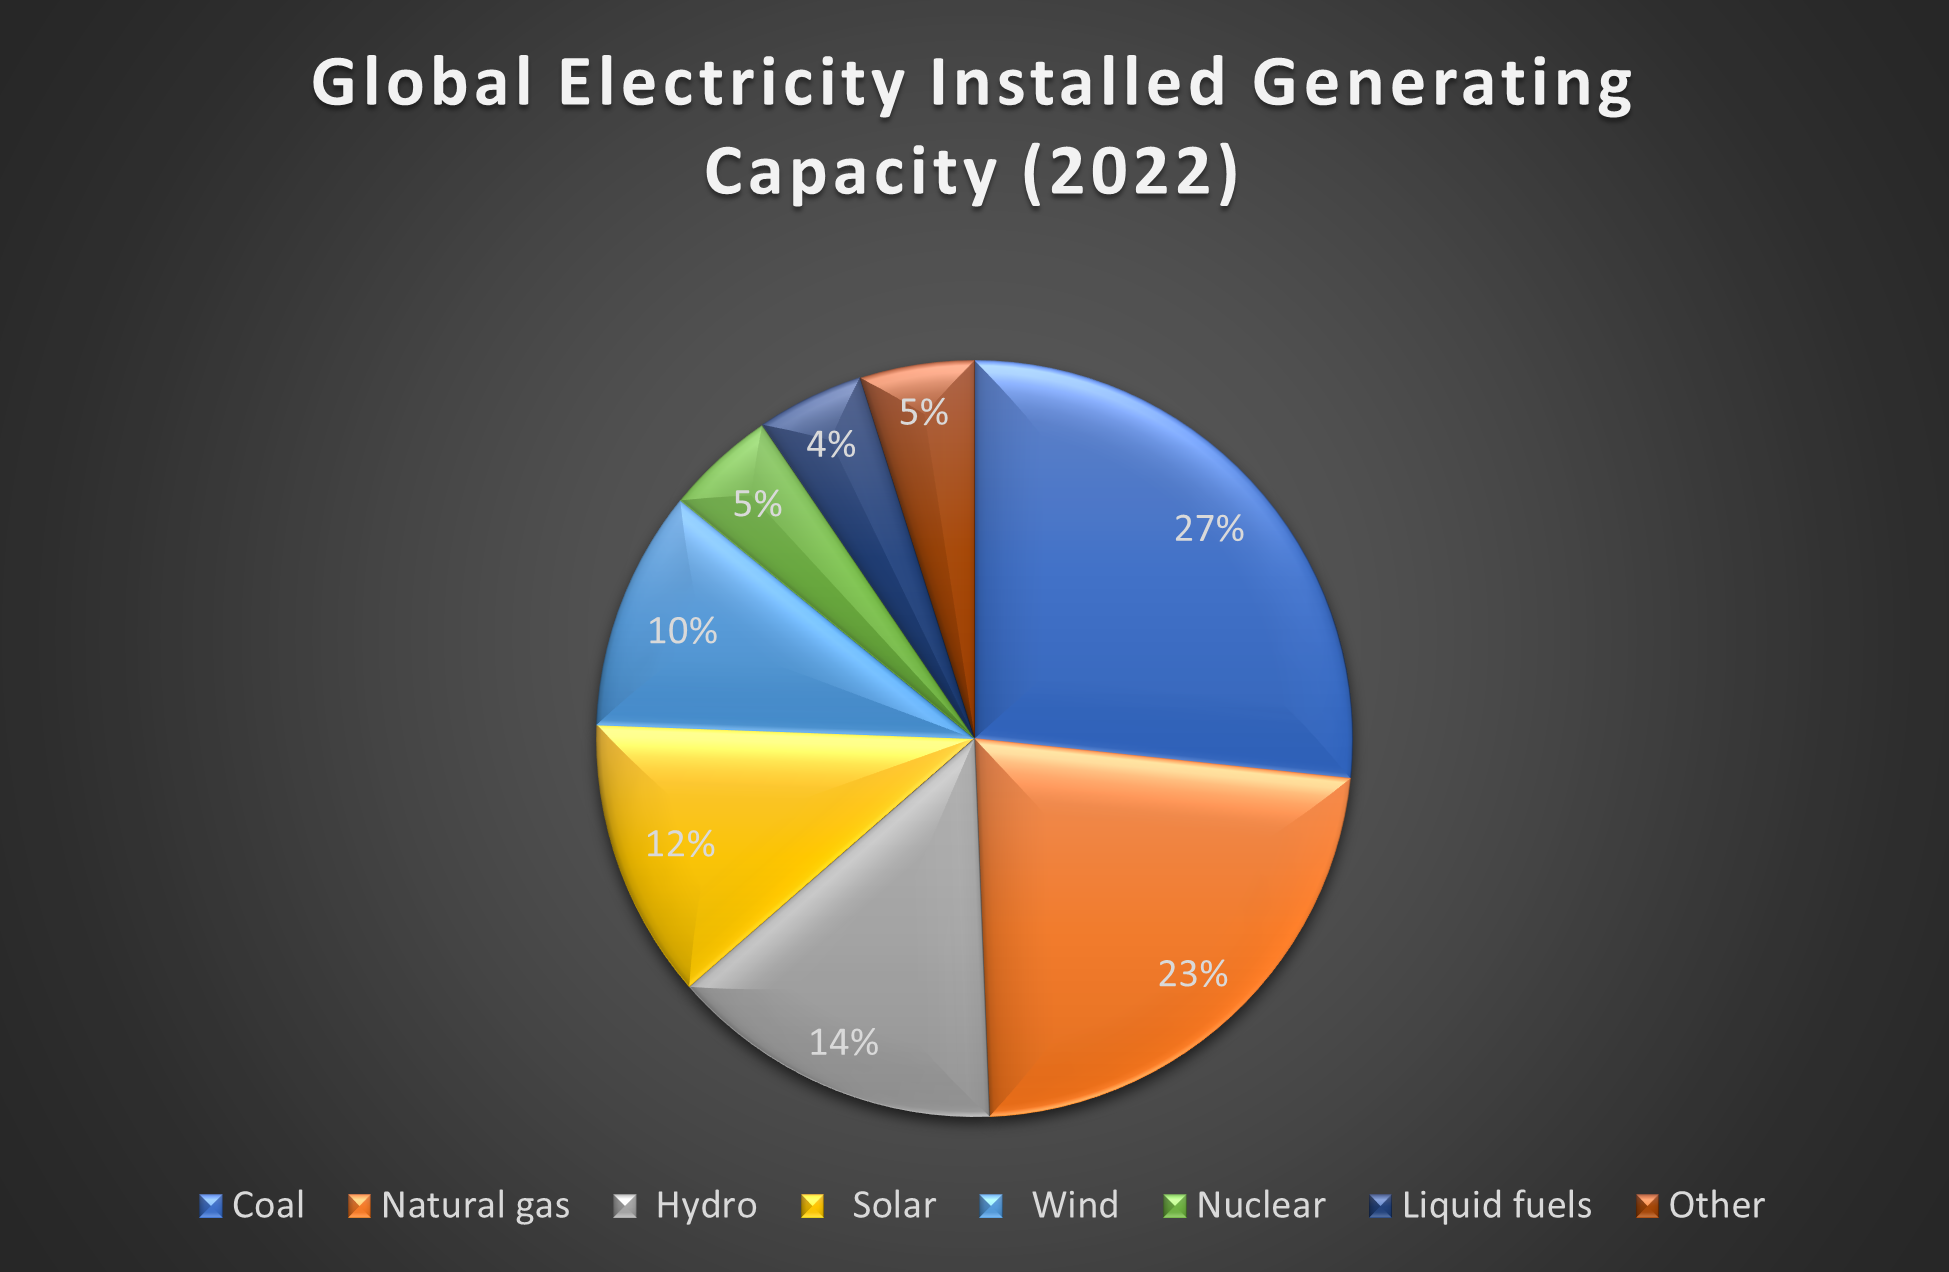 03-coal-power-is-still-the-primary-energy-source-for-global-electricity-generation